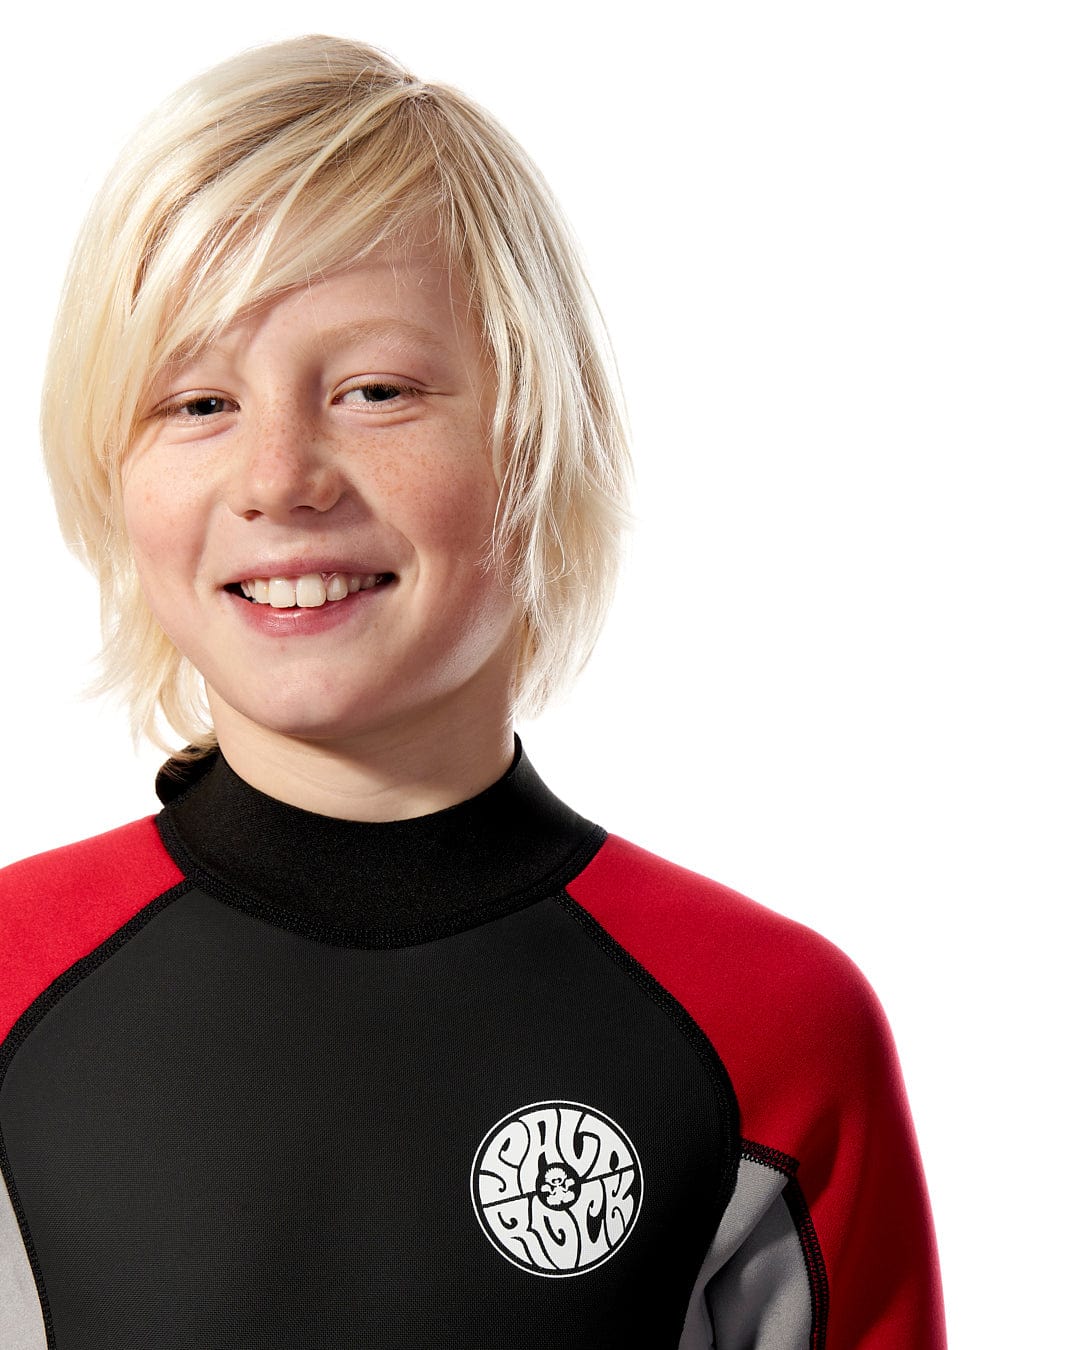 A young boy in a Saltrock Core - 3/2 Shortie Wetsuit - Red, smiling.